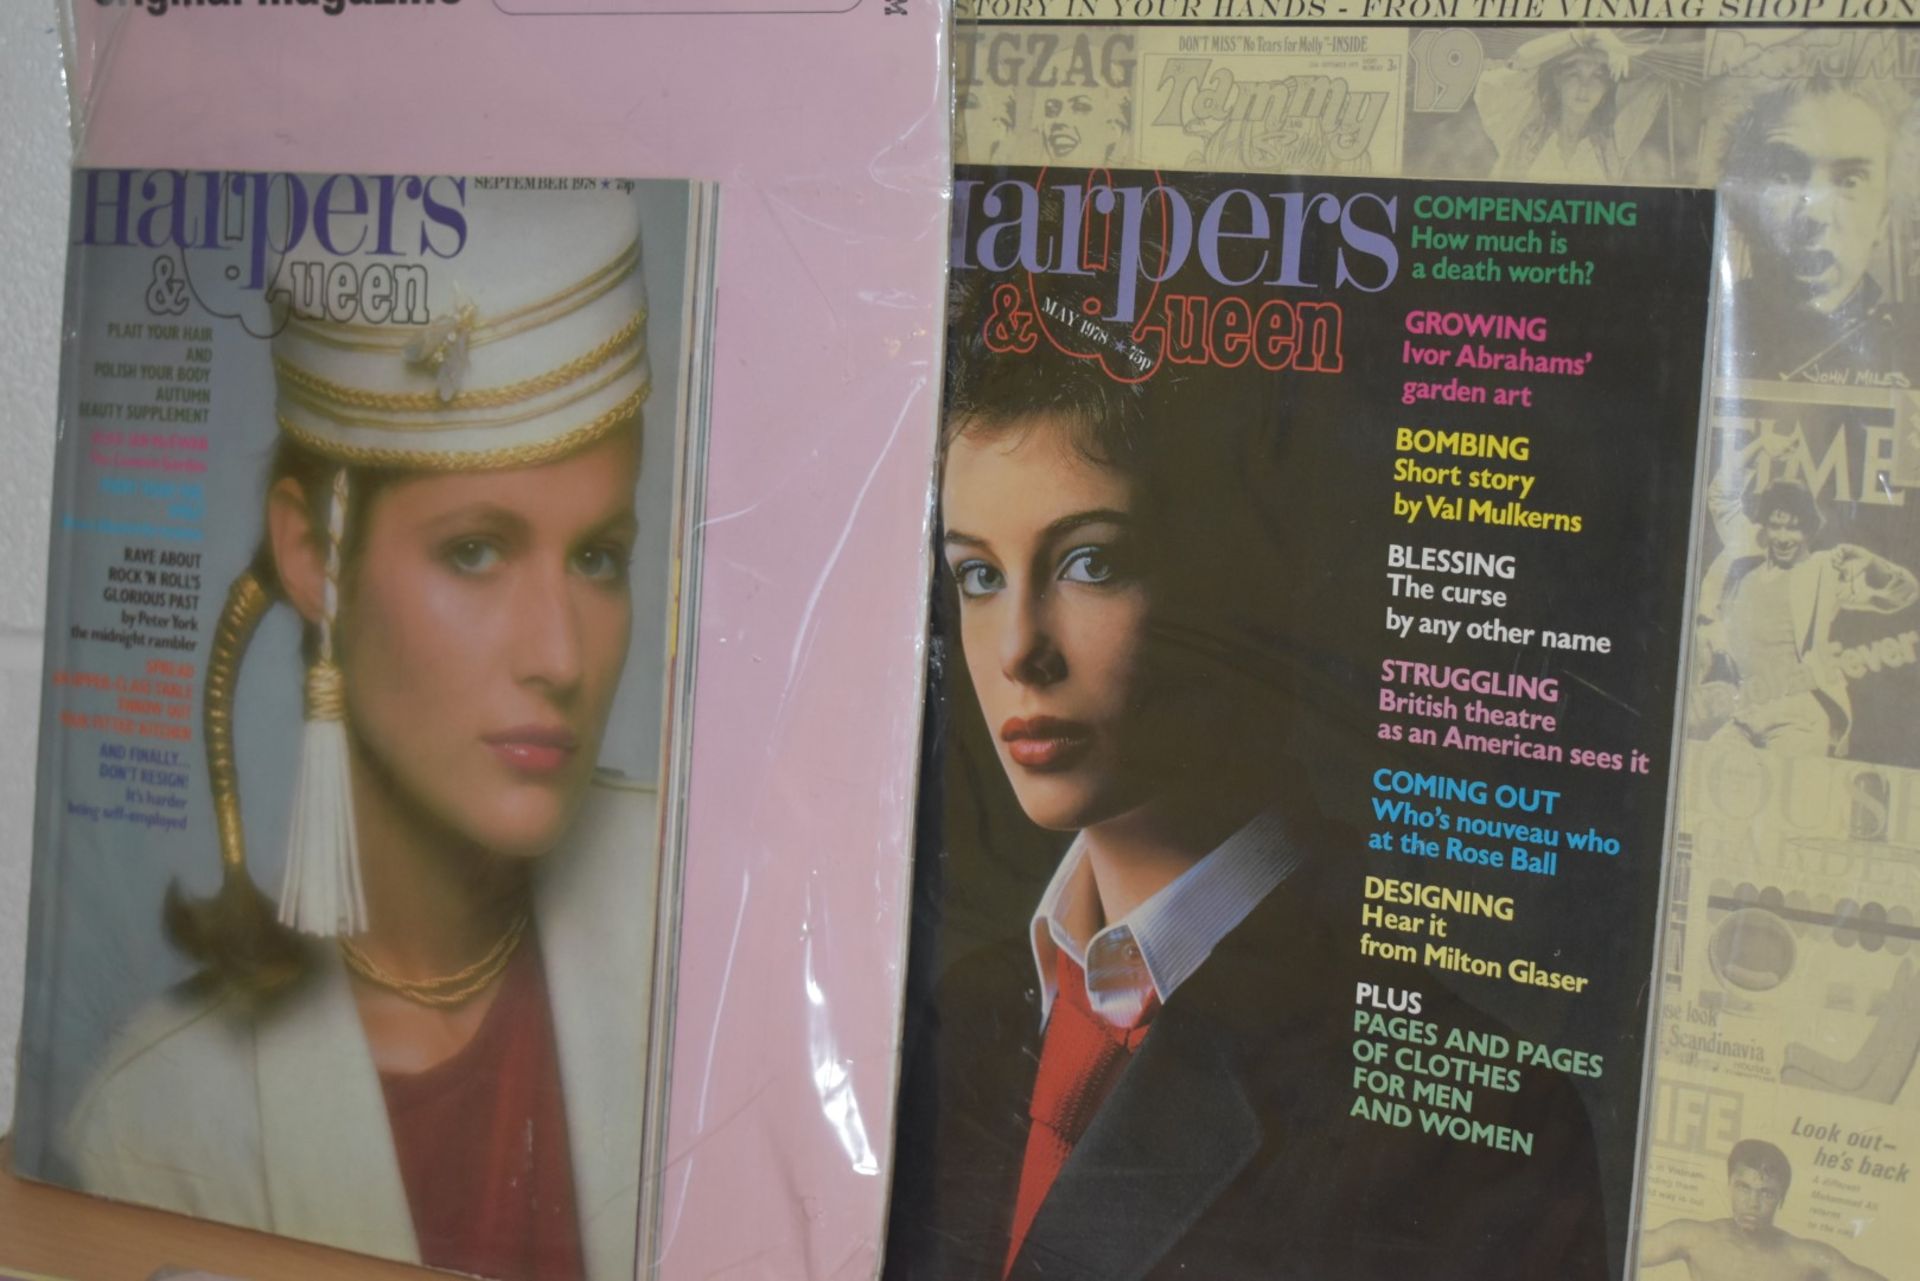 39 x Vintage Women's Fashion Magazines from the 1970's - Ref MB103 - Vogue, Women's Journal, Over21, - Image 11 of 17